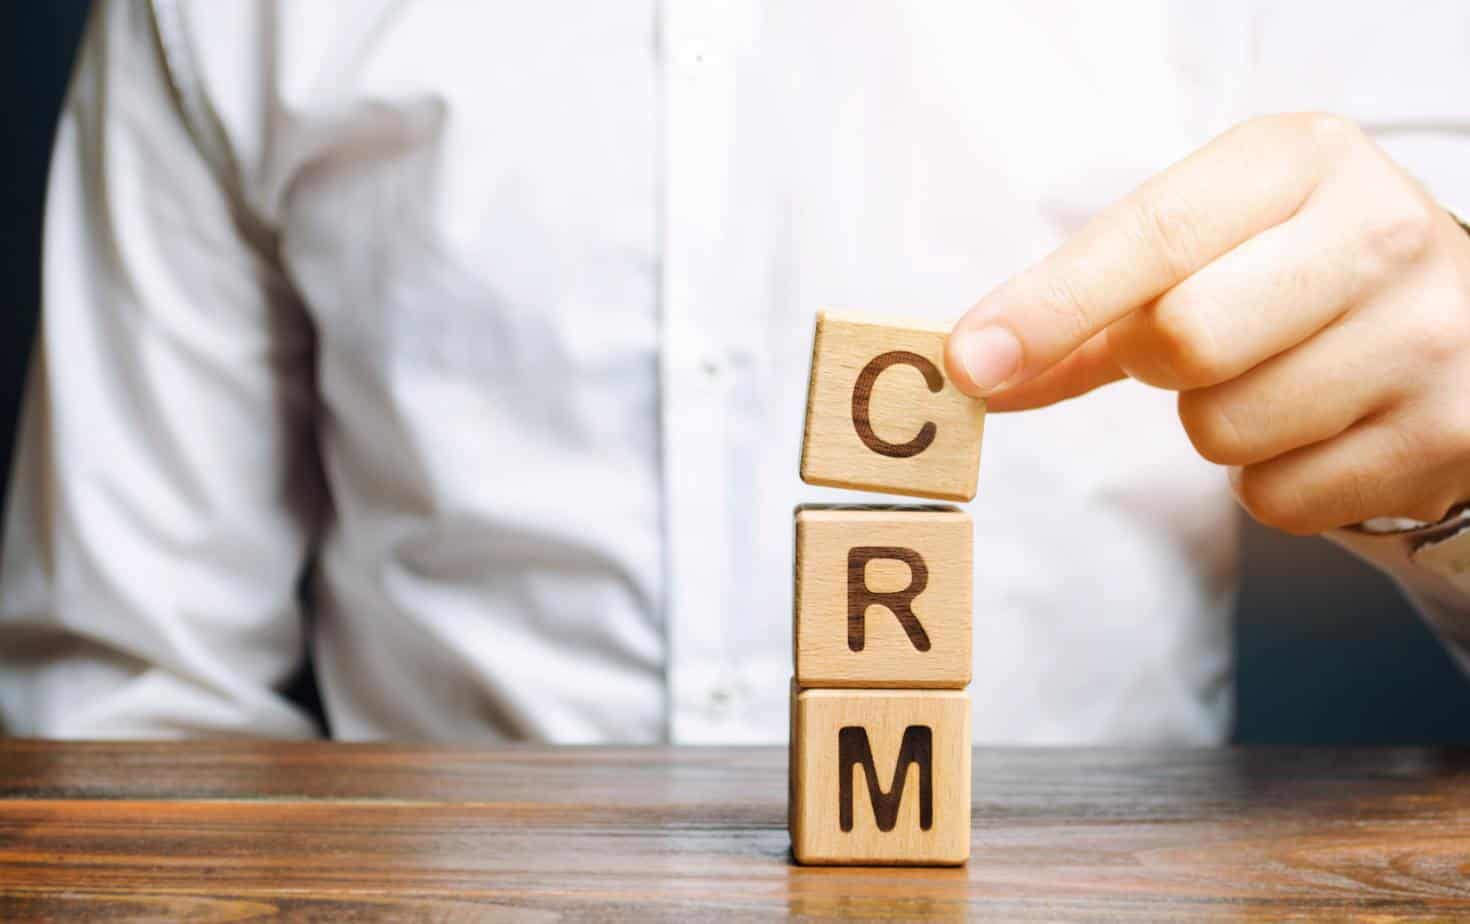 Wooden blocks with the word CRM (Customer Relationship Management) and businessman